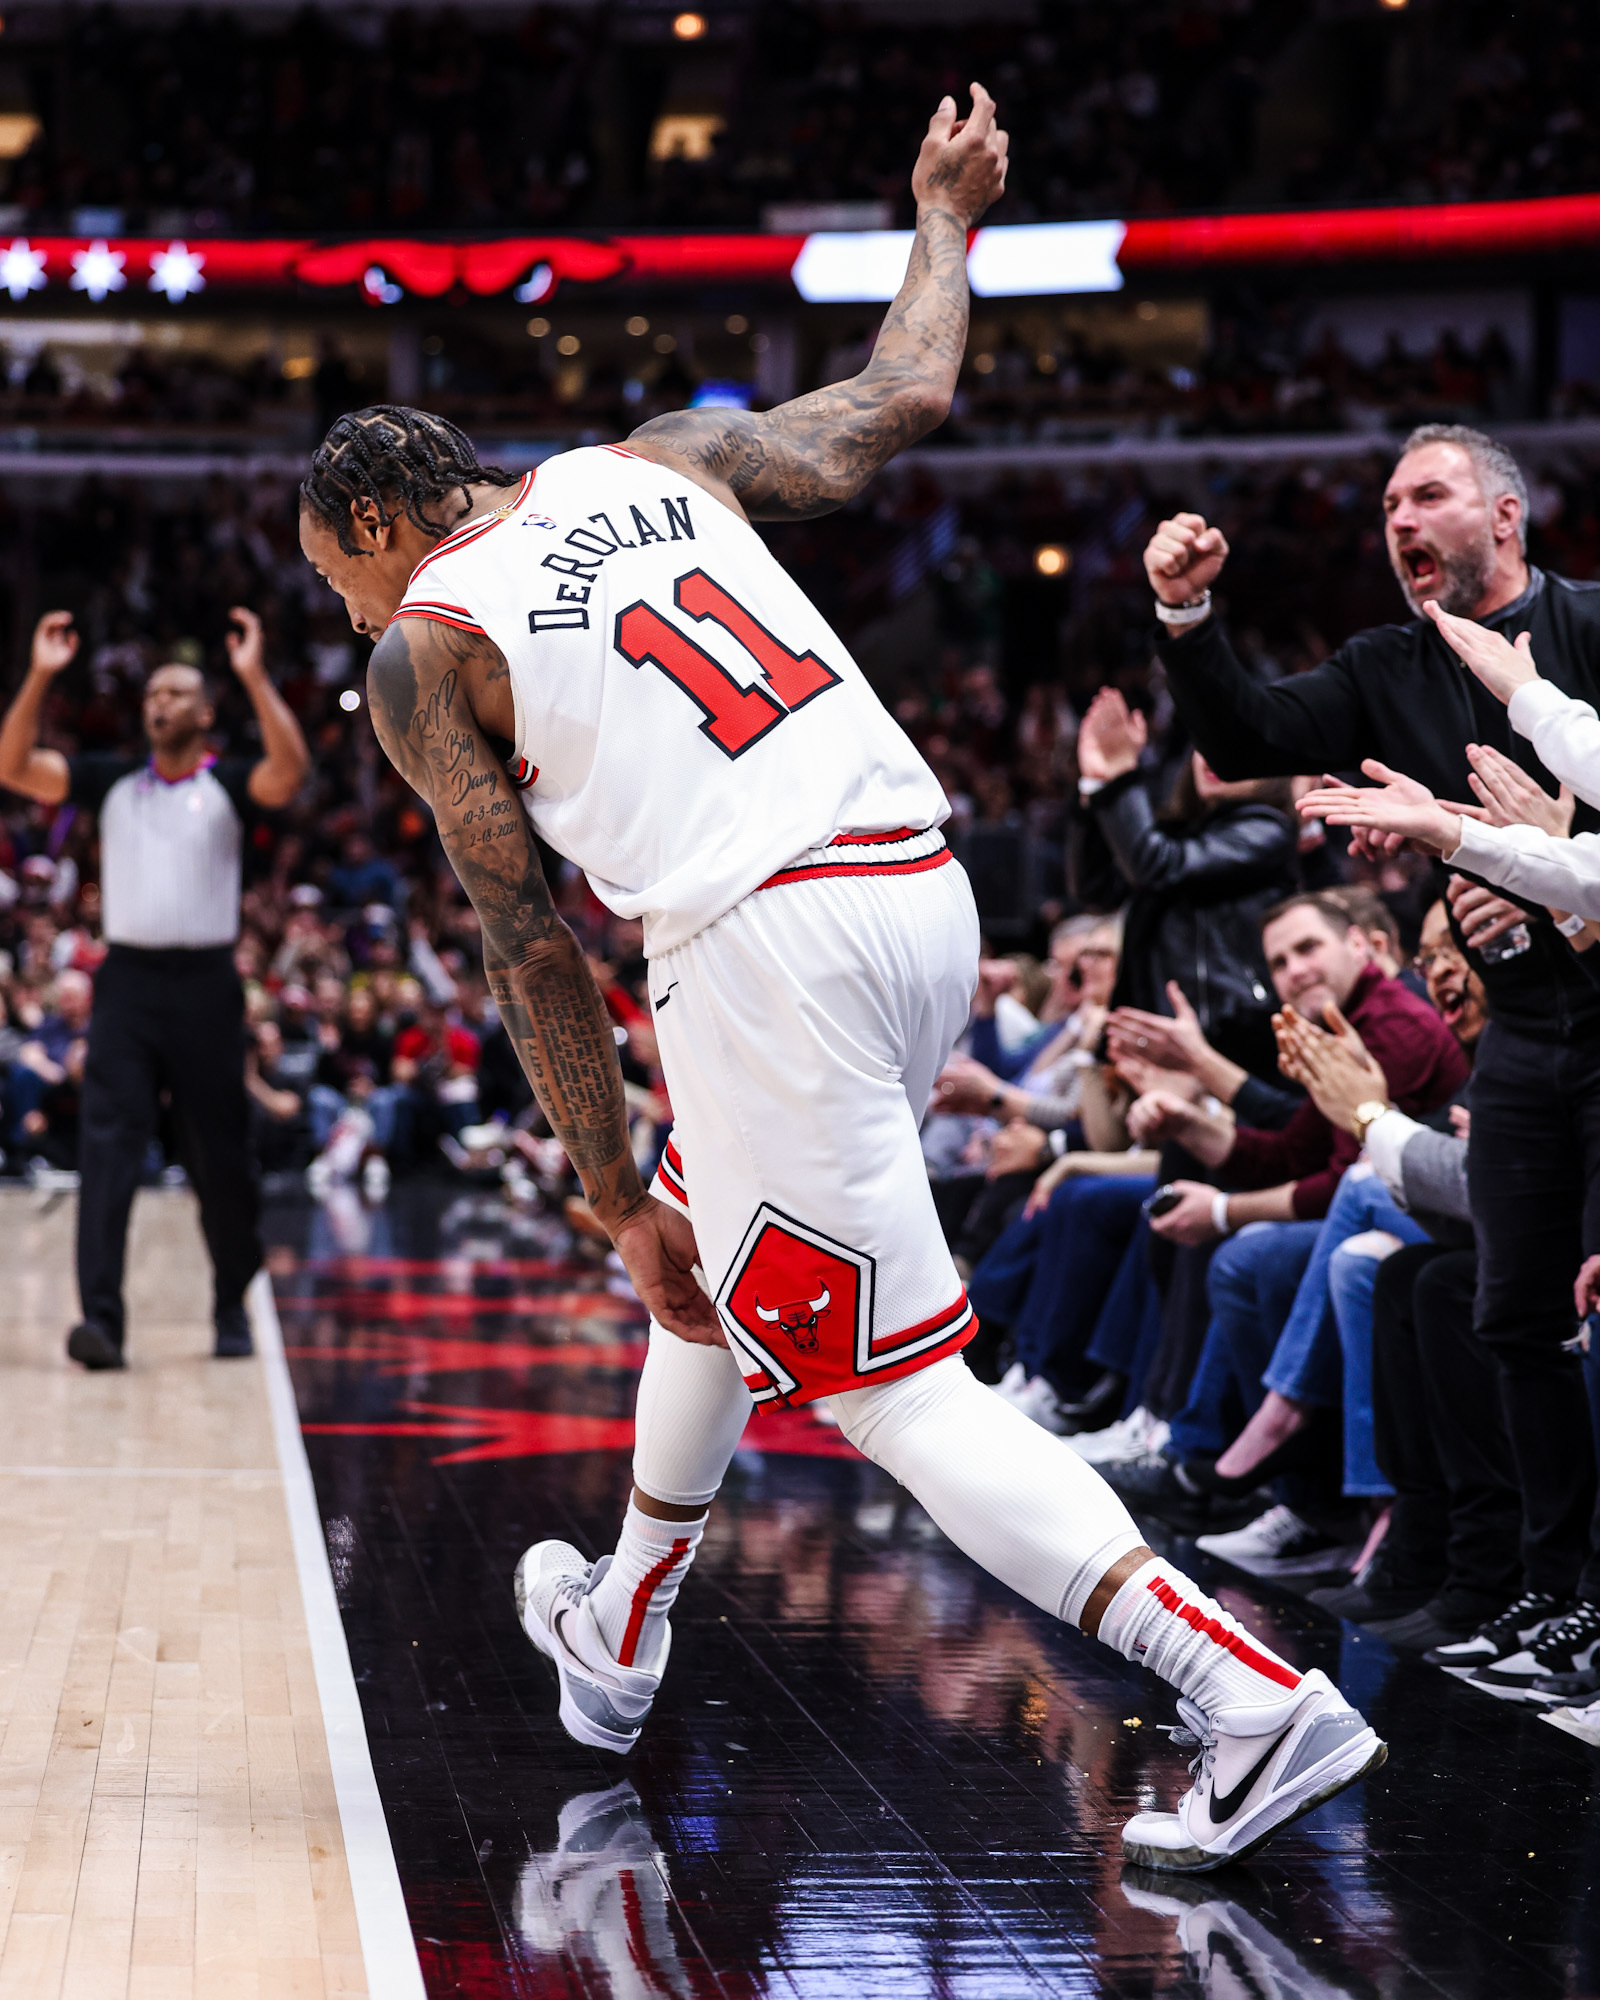 BullsMuse on X: …to Chicago.  / X